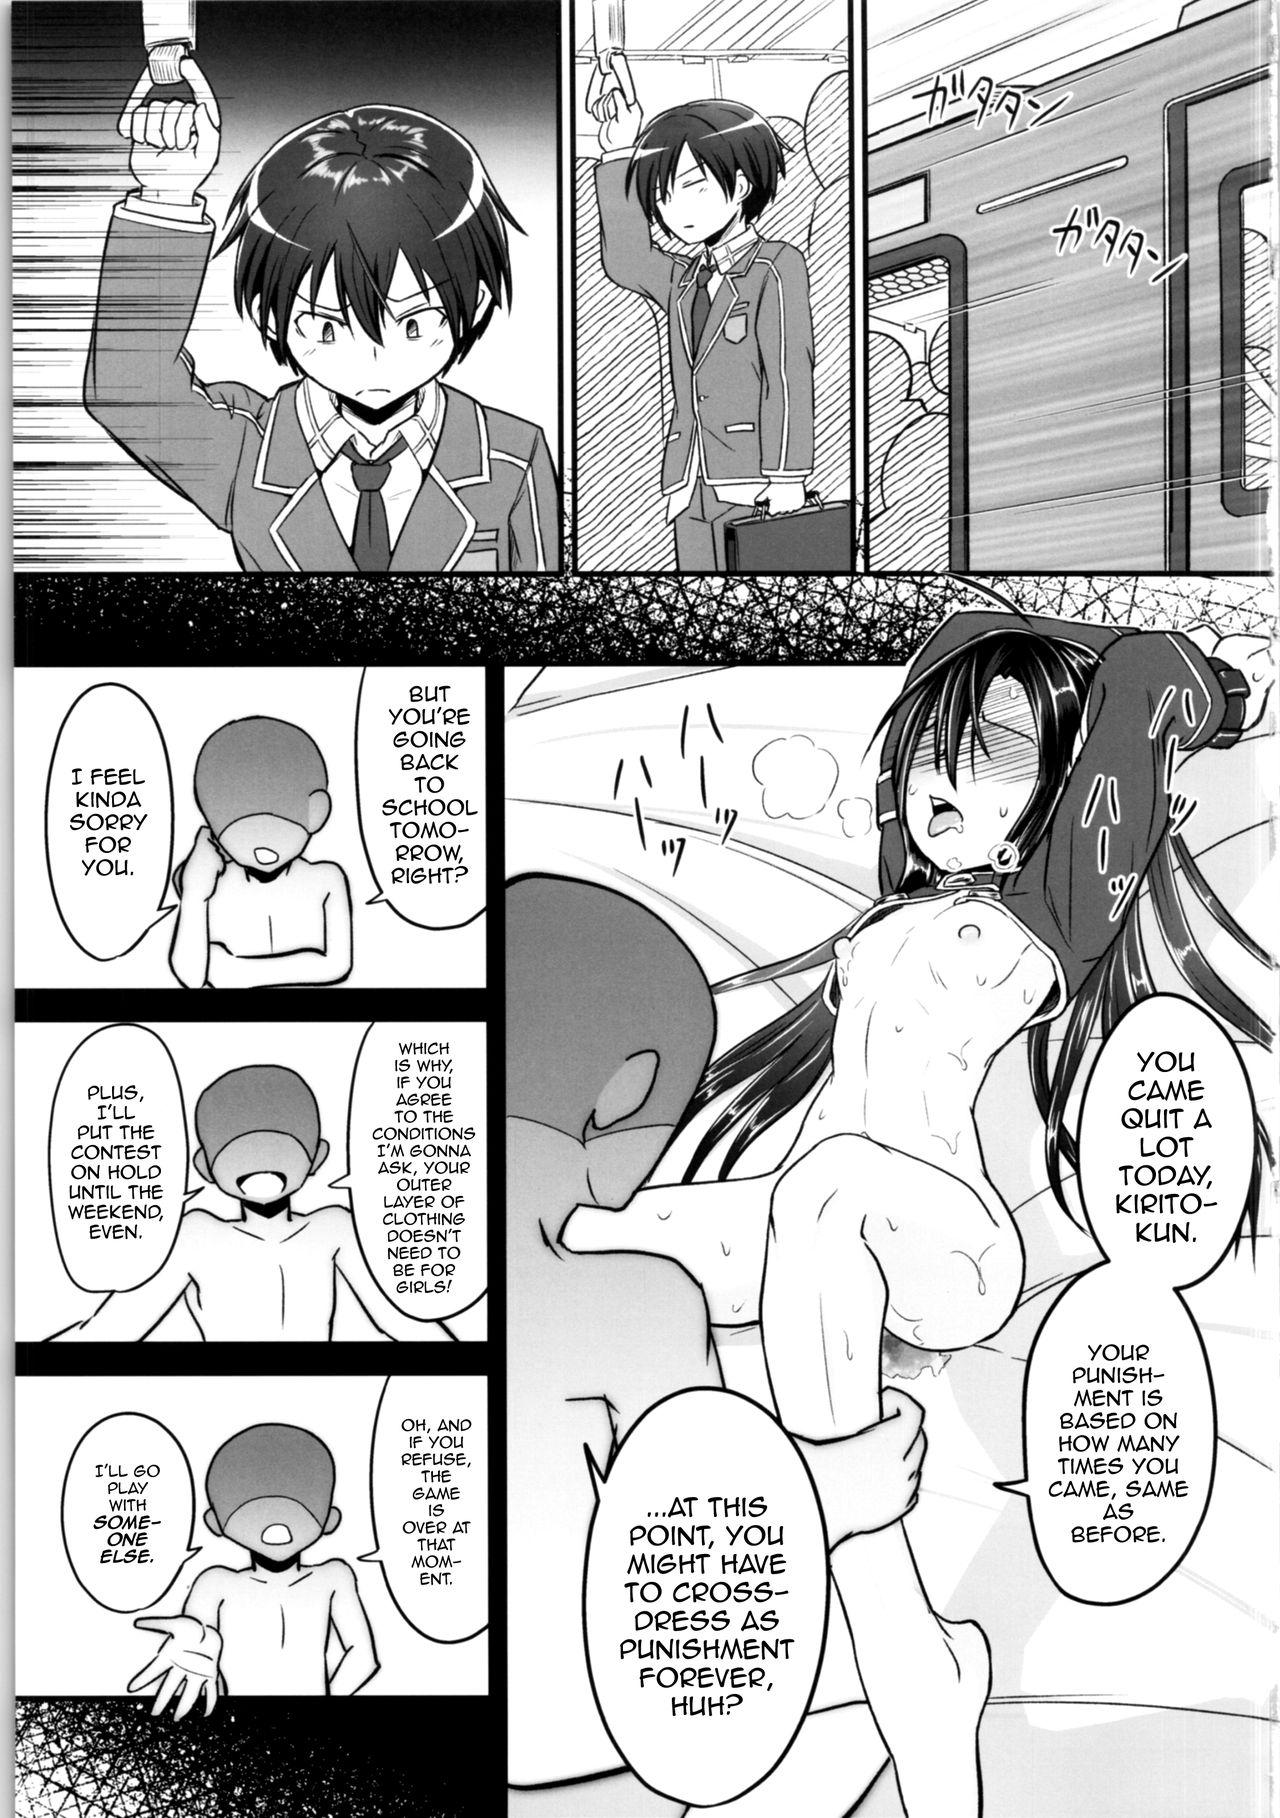 Mms Kiriko Route Another #02 - Sword art online Milf Porn - Page 2